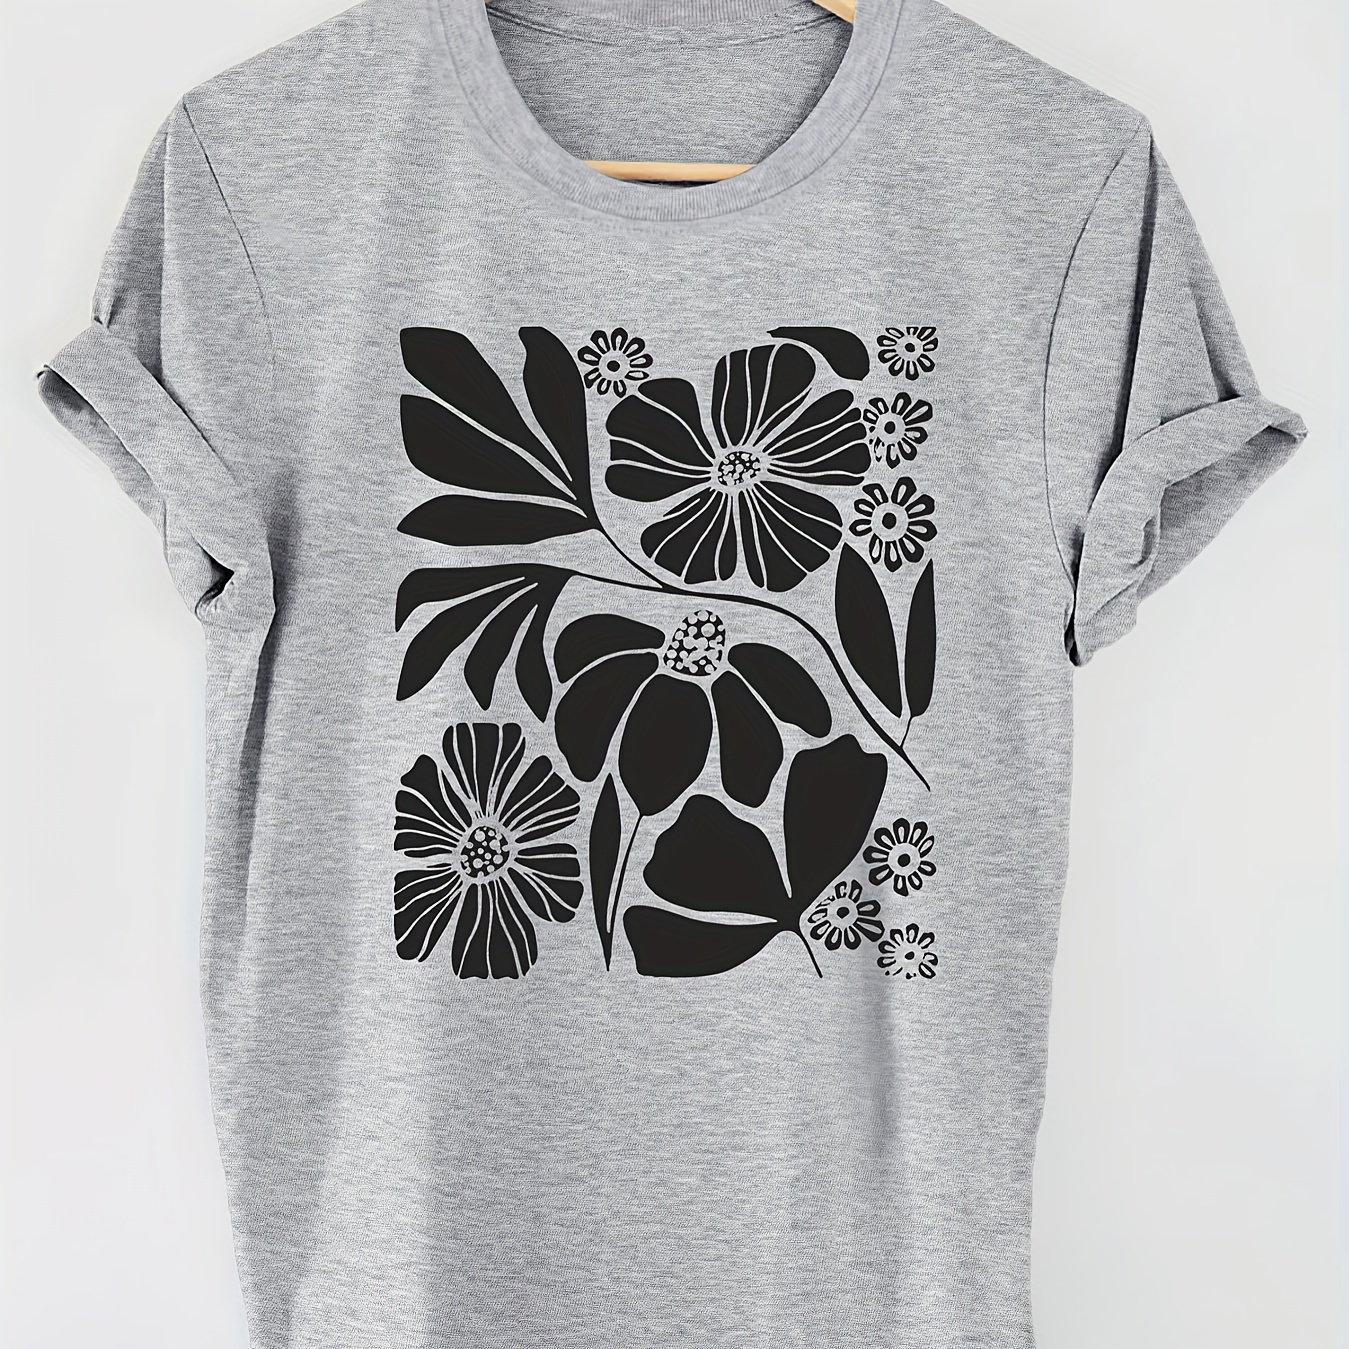 

Floral Graphic Print Knitted T-shirt, Short Sleeve Crew Neck Casual Top For Summer & Spring, Women's Clothing